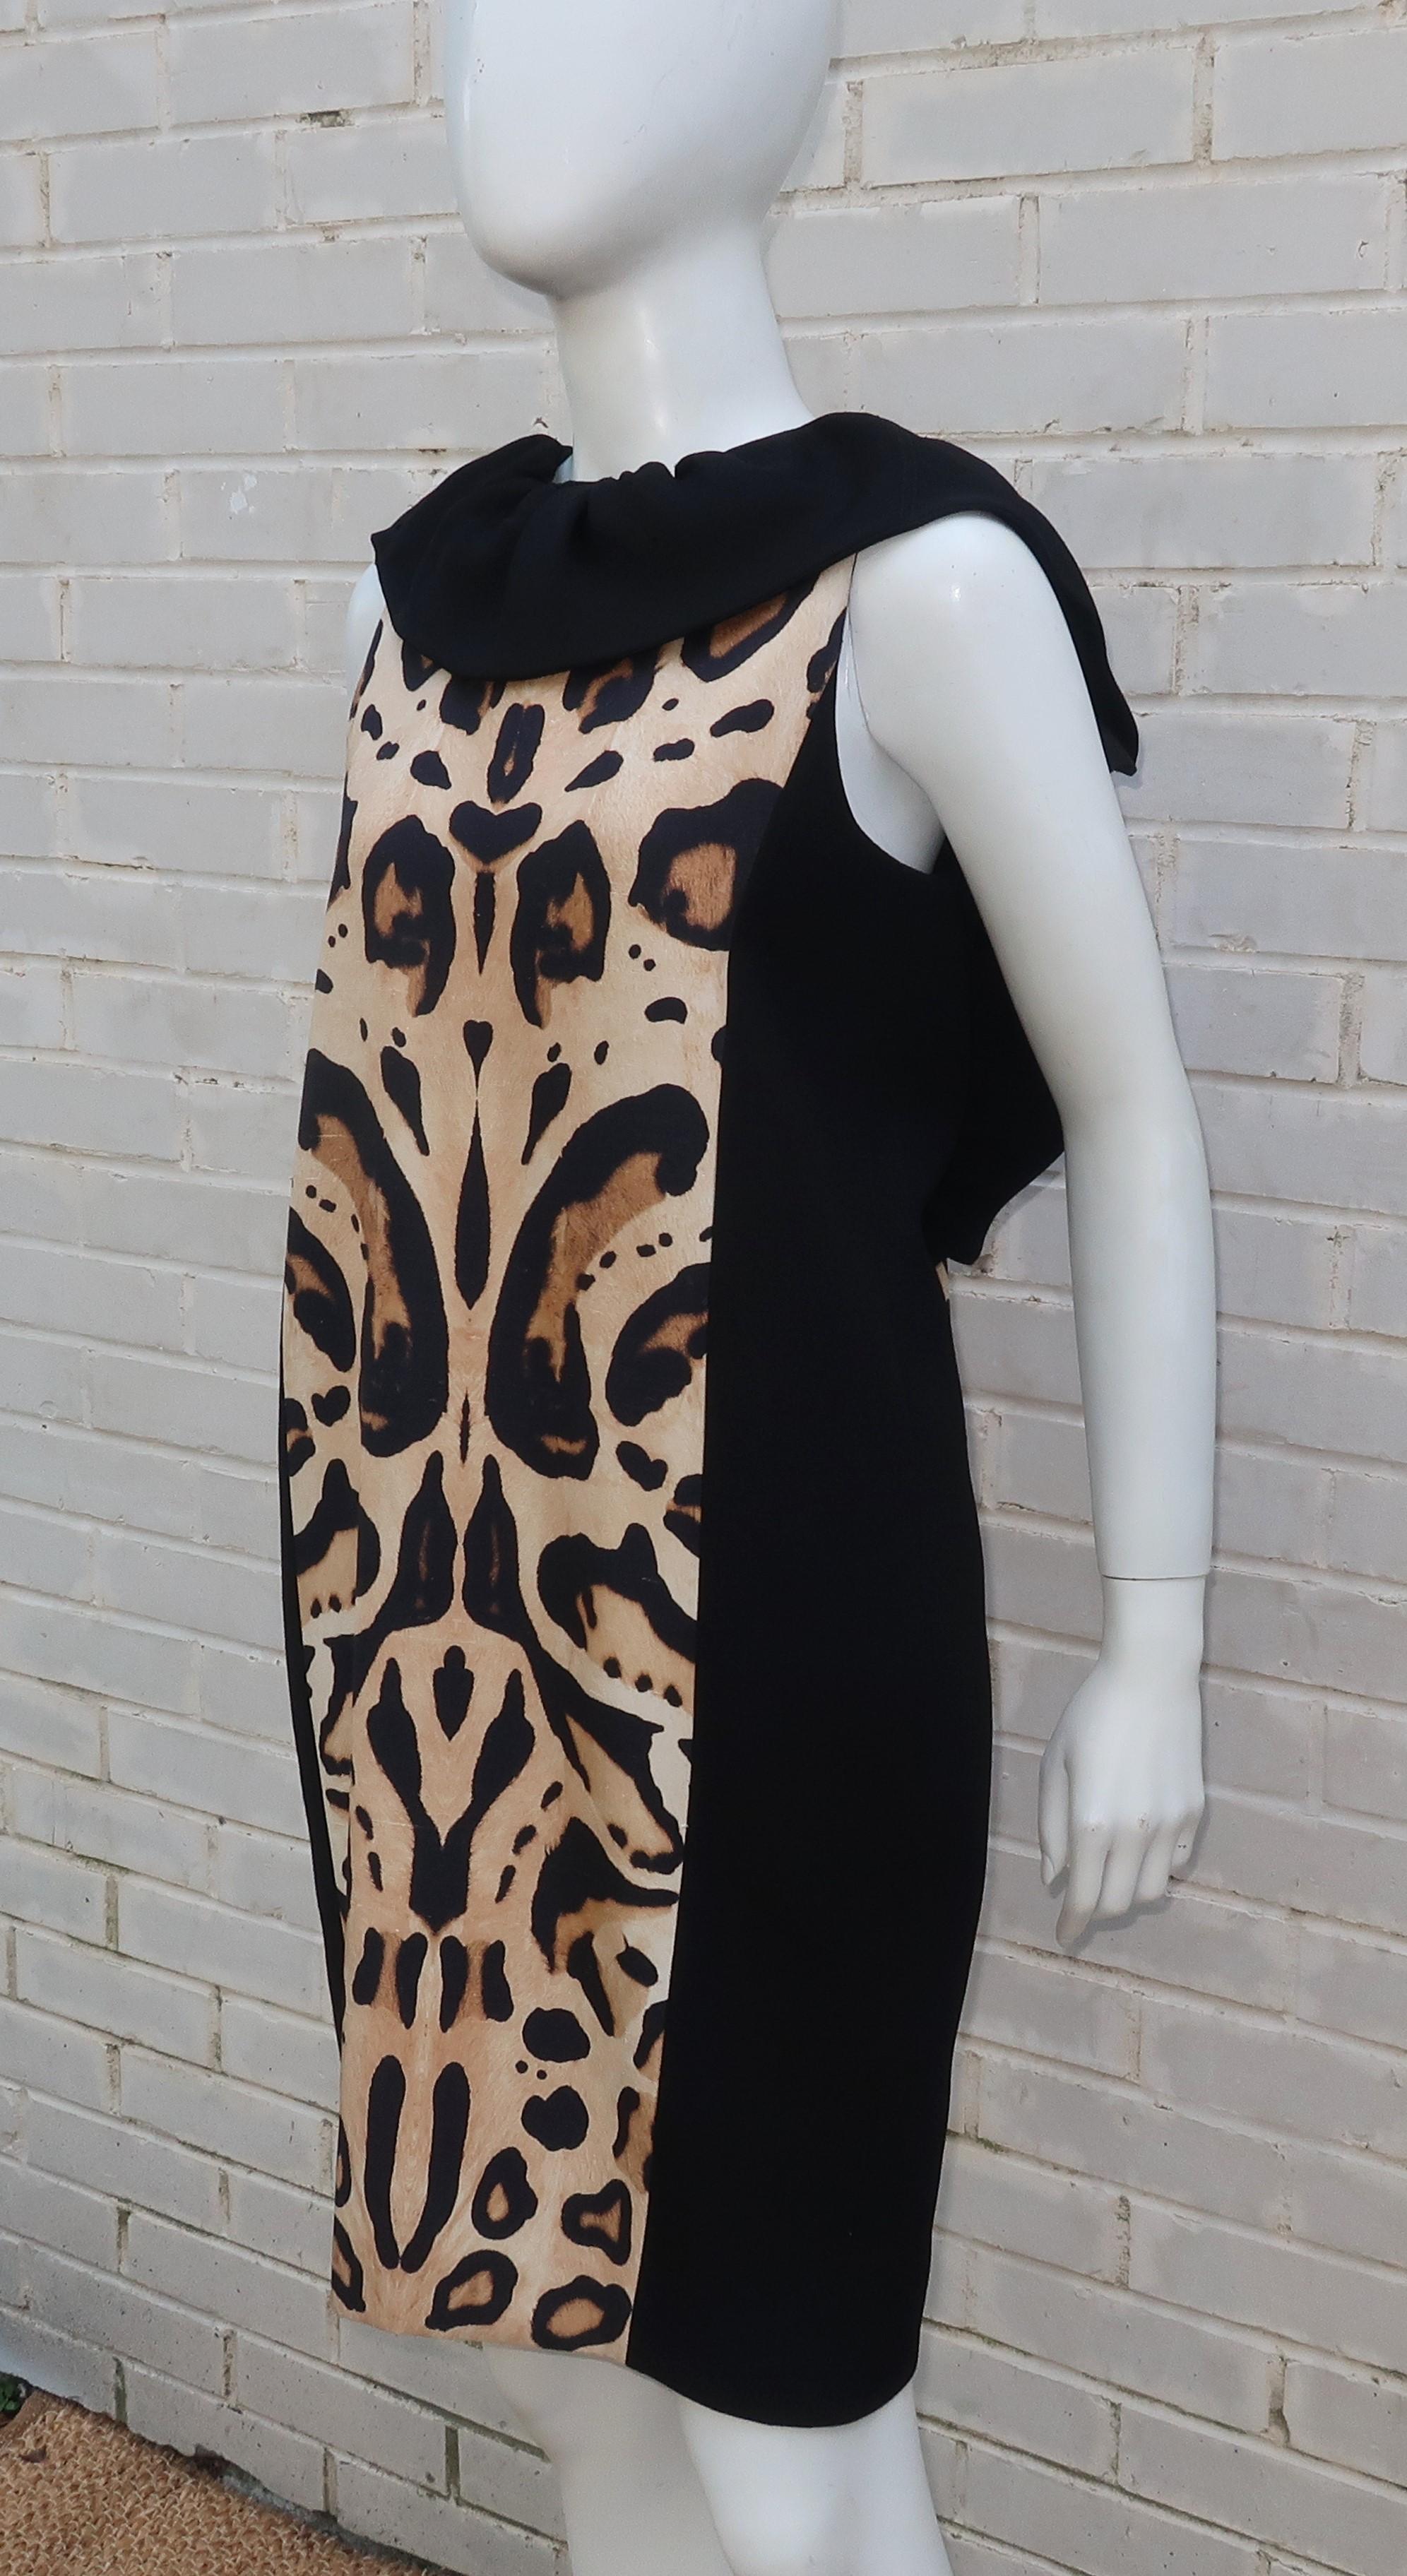 This Giambattista Valli dress combines visual graphics with expert tailoring and a youthful aesthetic.  The sheath style dress is a combination of a textured nubby black linen and an animal print that has textured characteristics of dupioni silk,